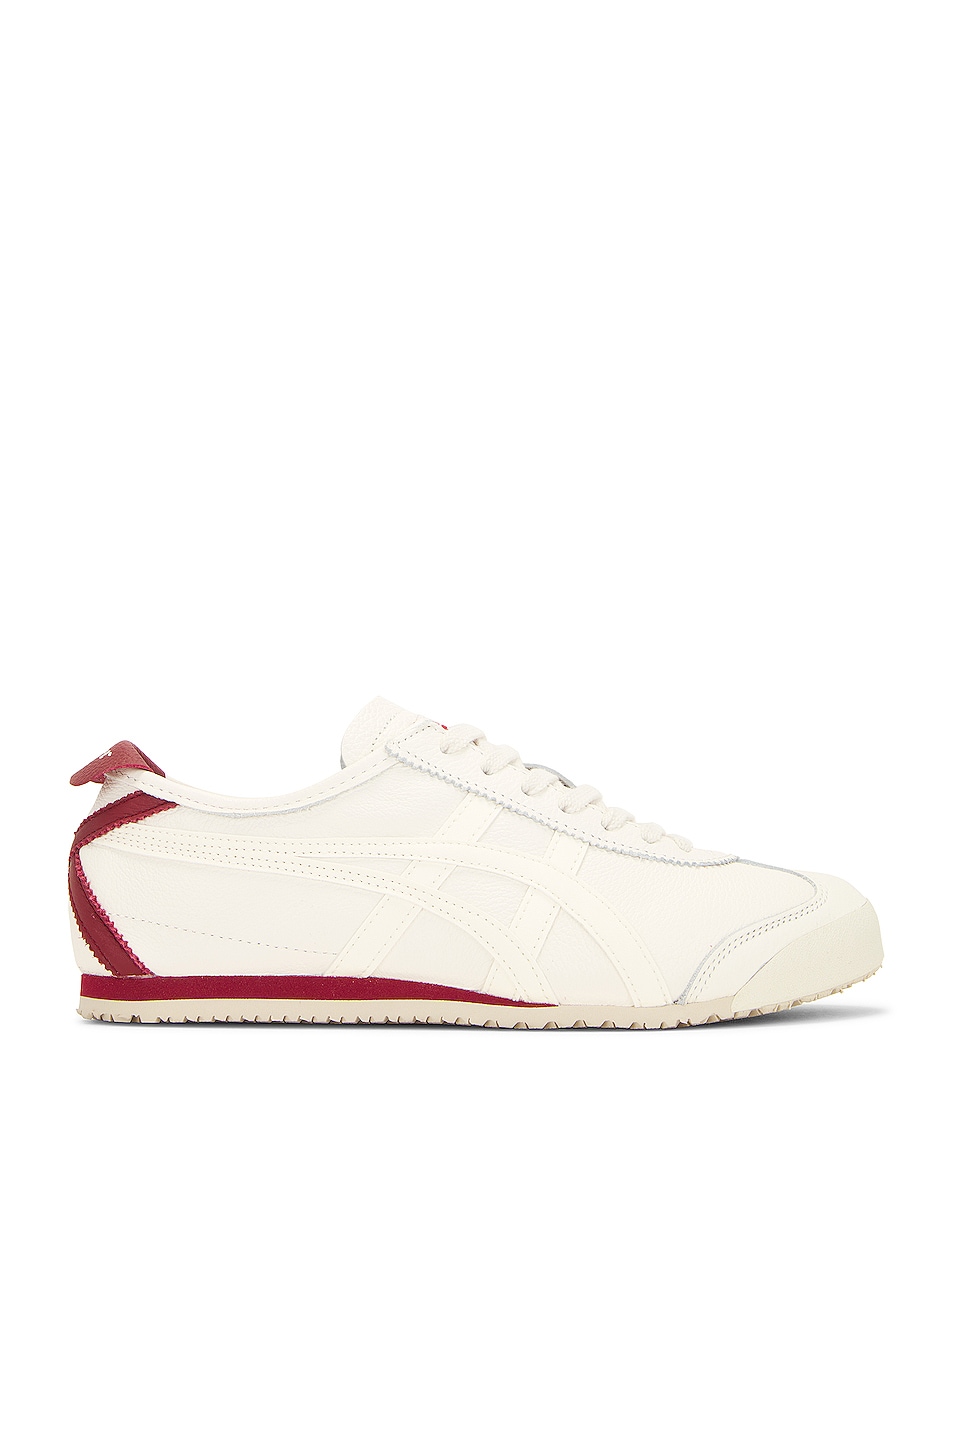 Image 1 of Onitsuka Tiger Mexico 66 in Cream & Beet Juice